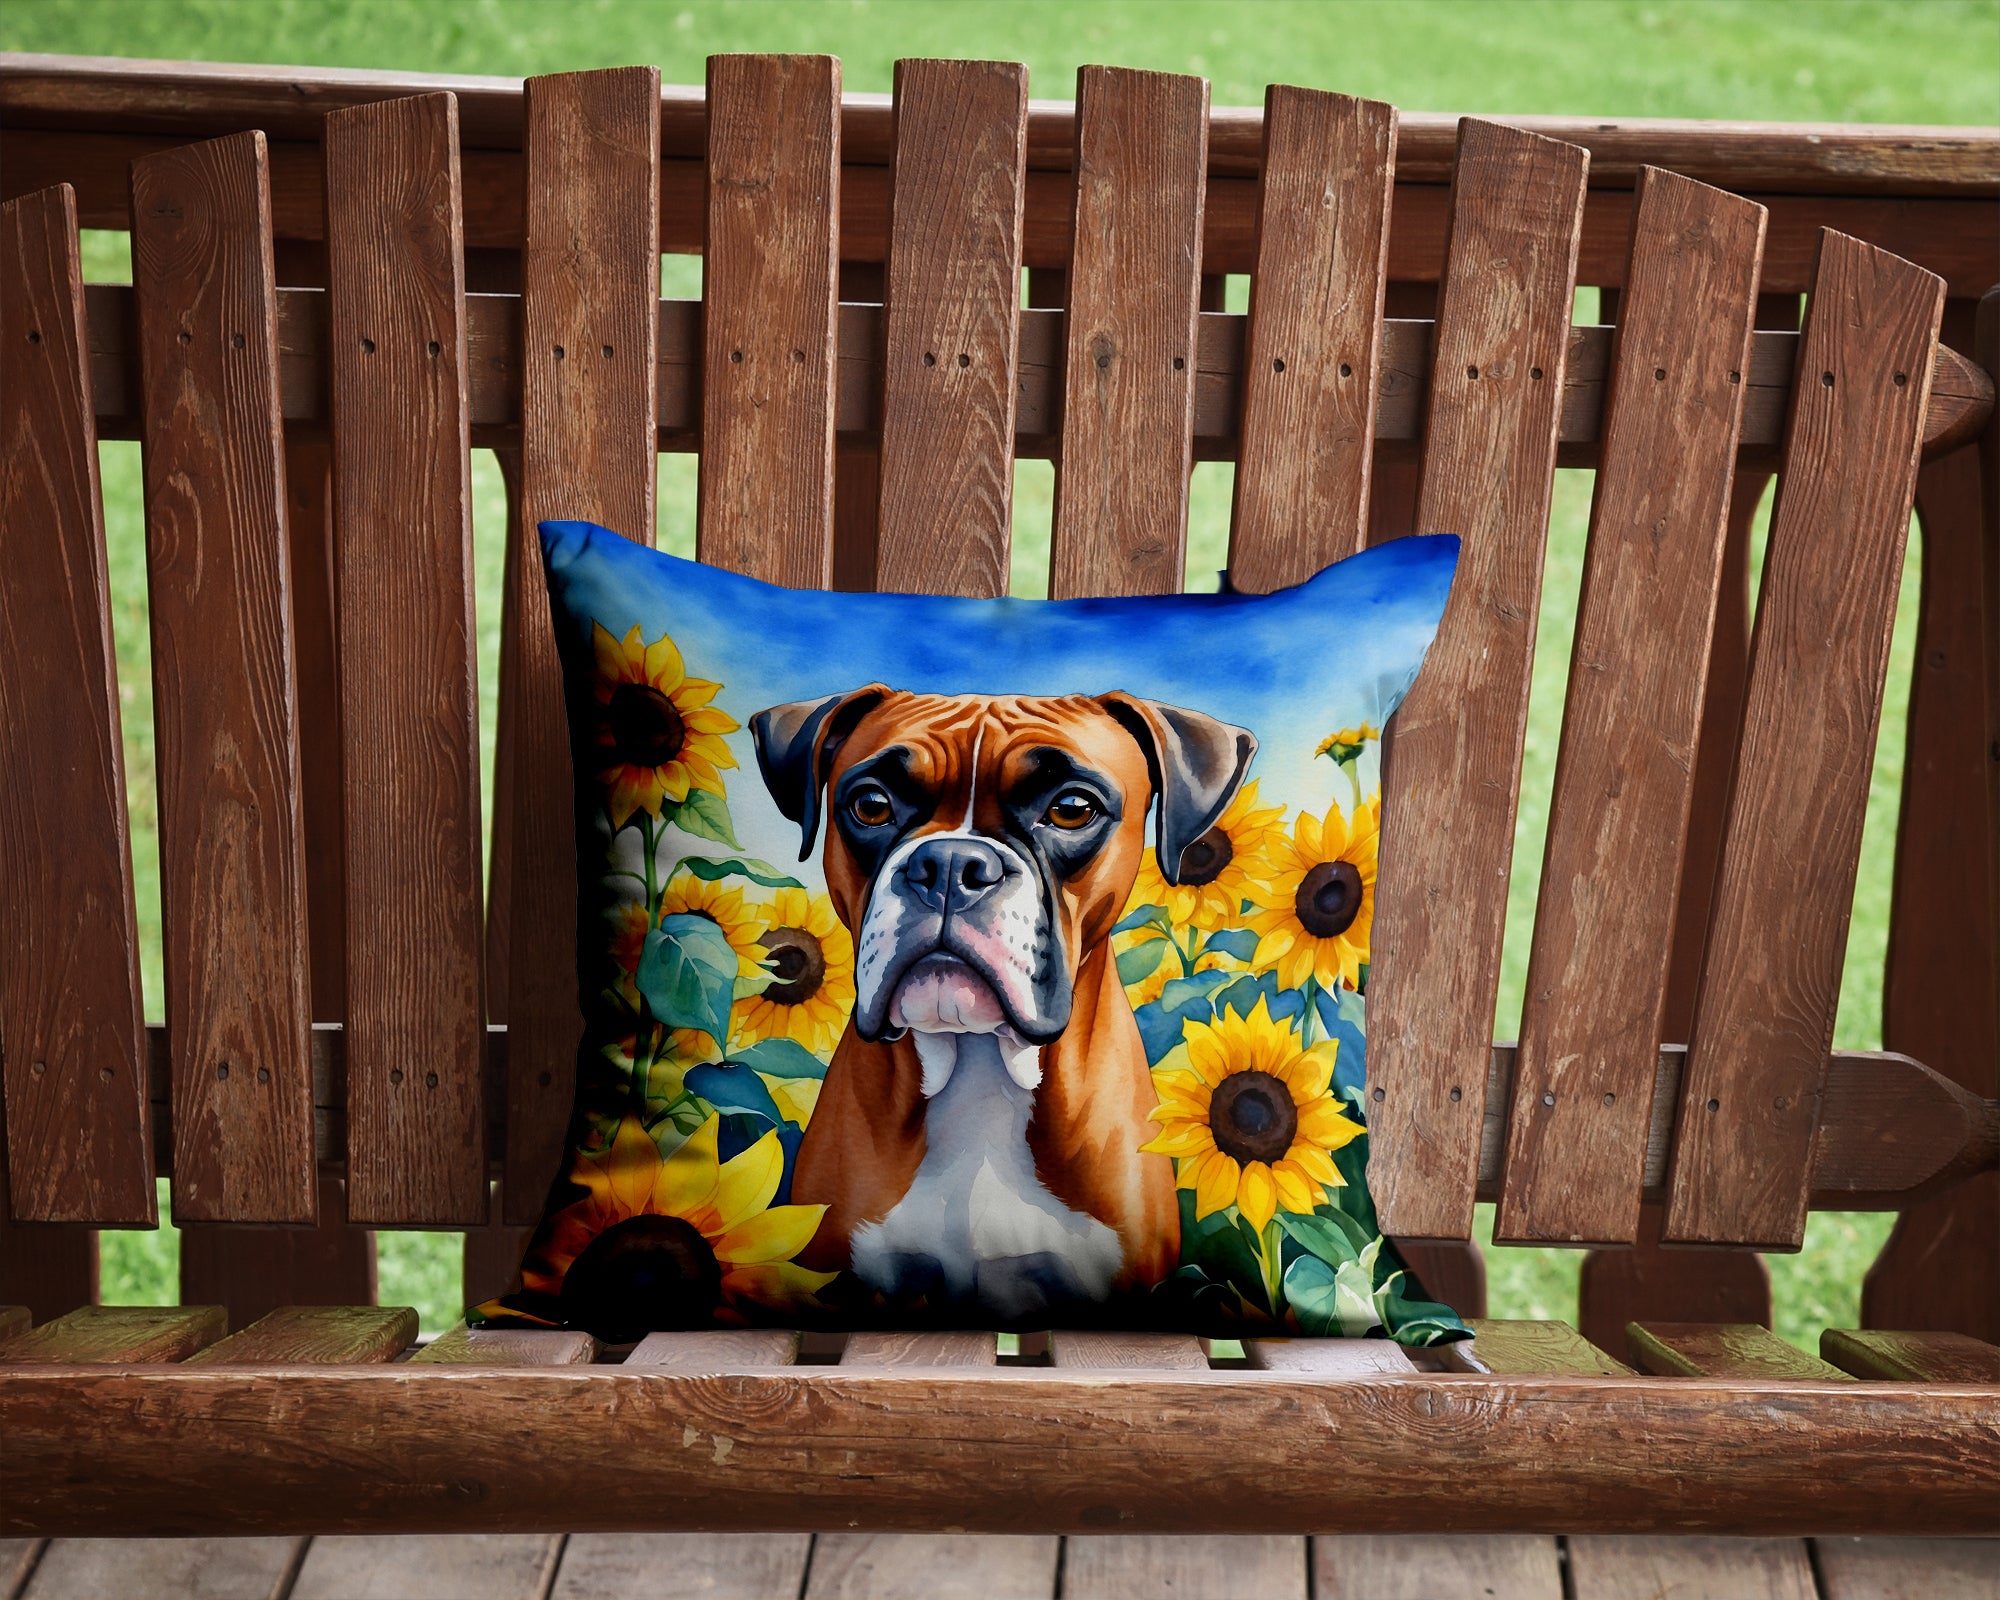 Buy this Boxer in Sunflowers Throw Pillow